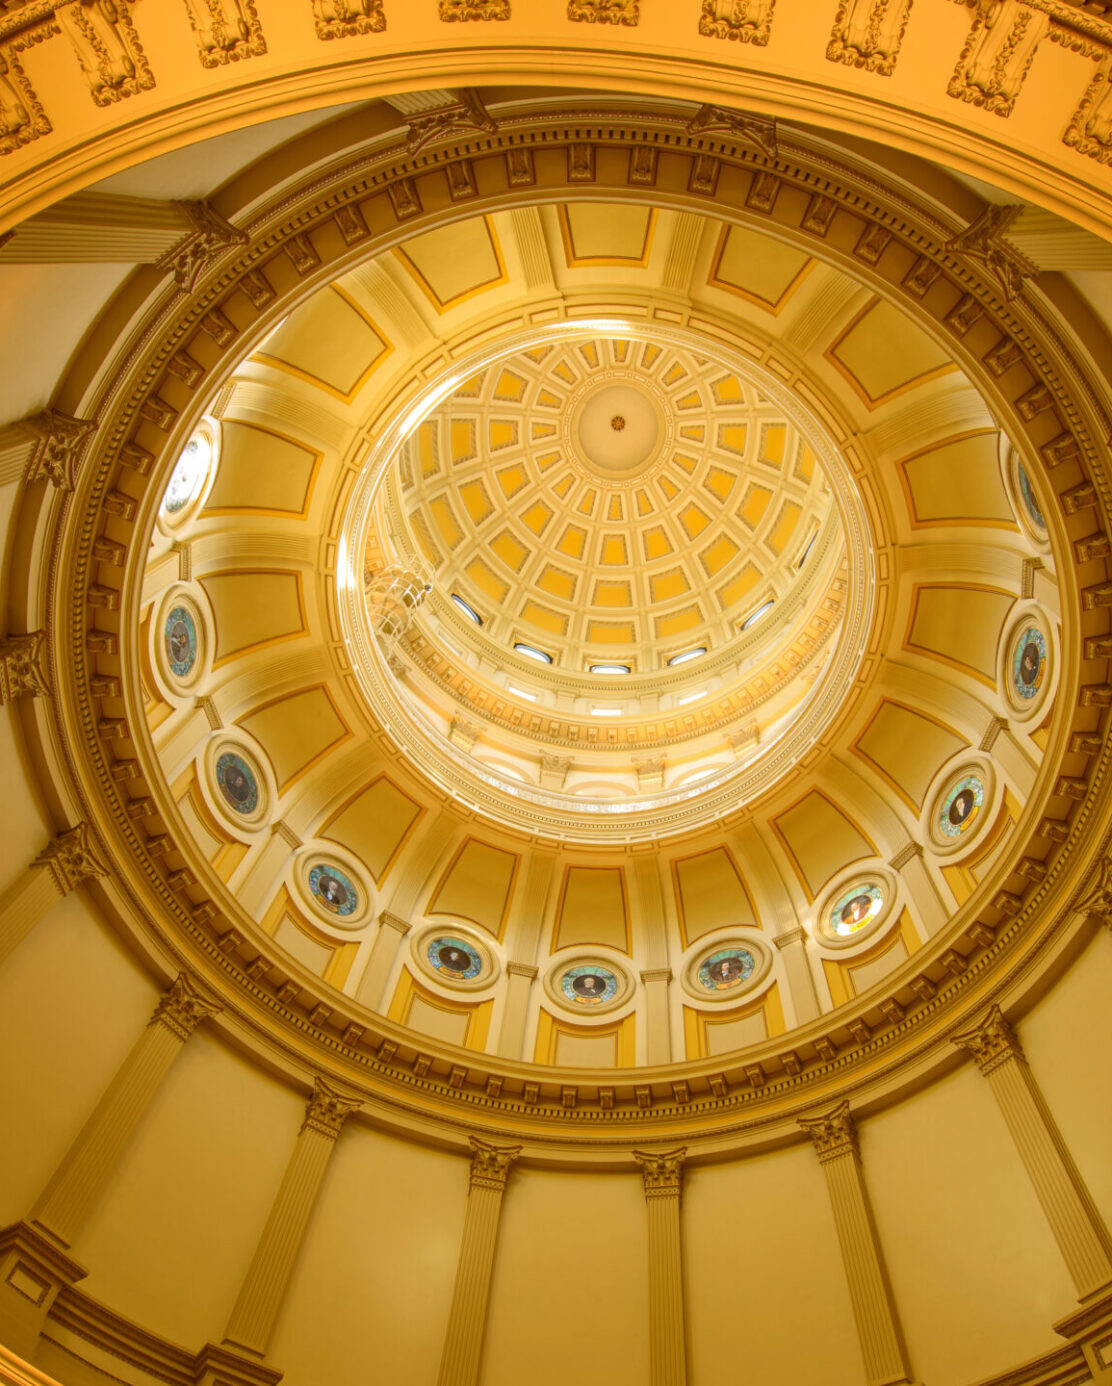 A close-up inside view of gold dome of Colorado State Capitol Building.